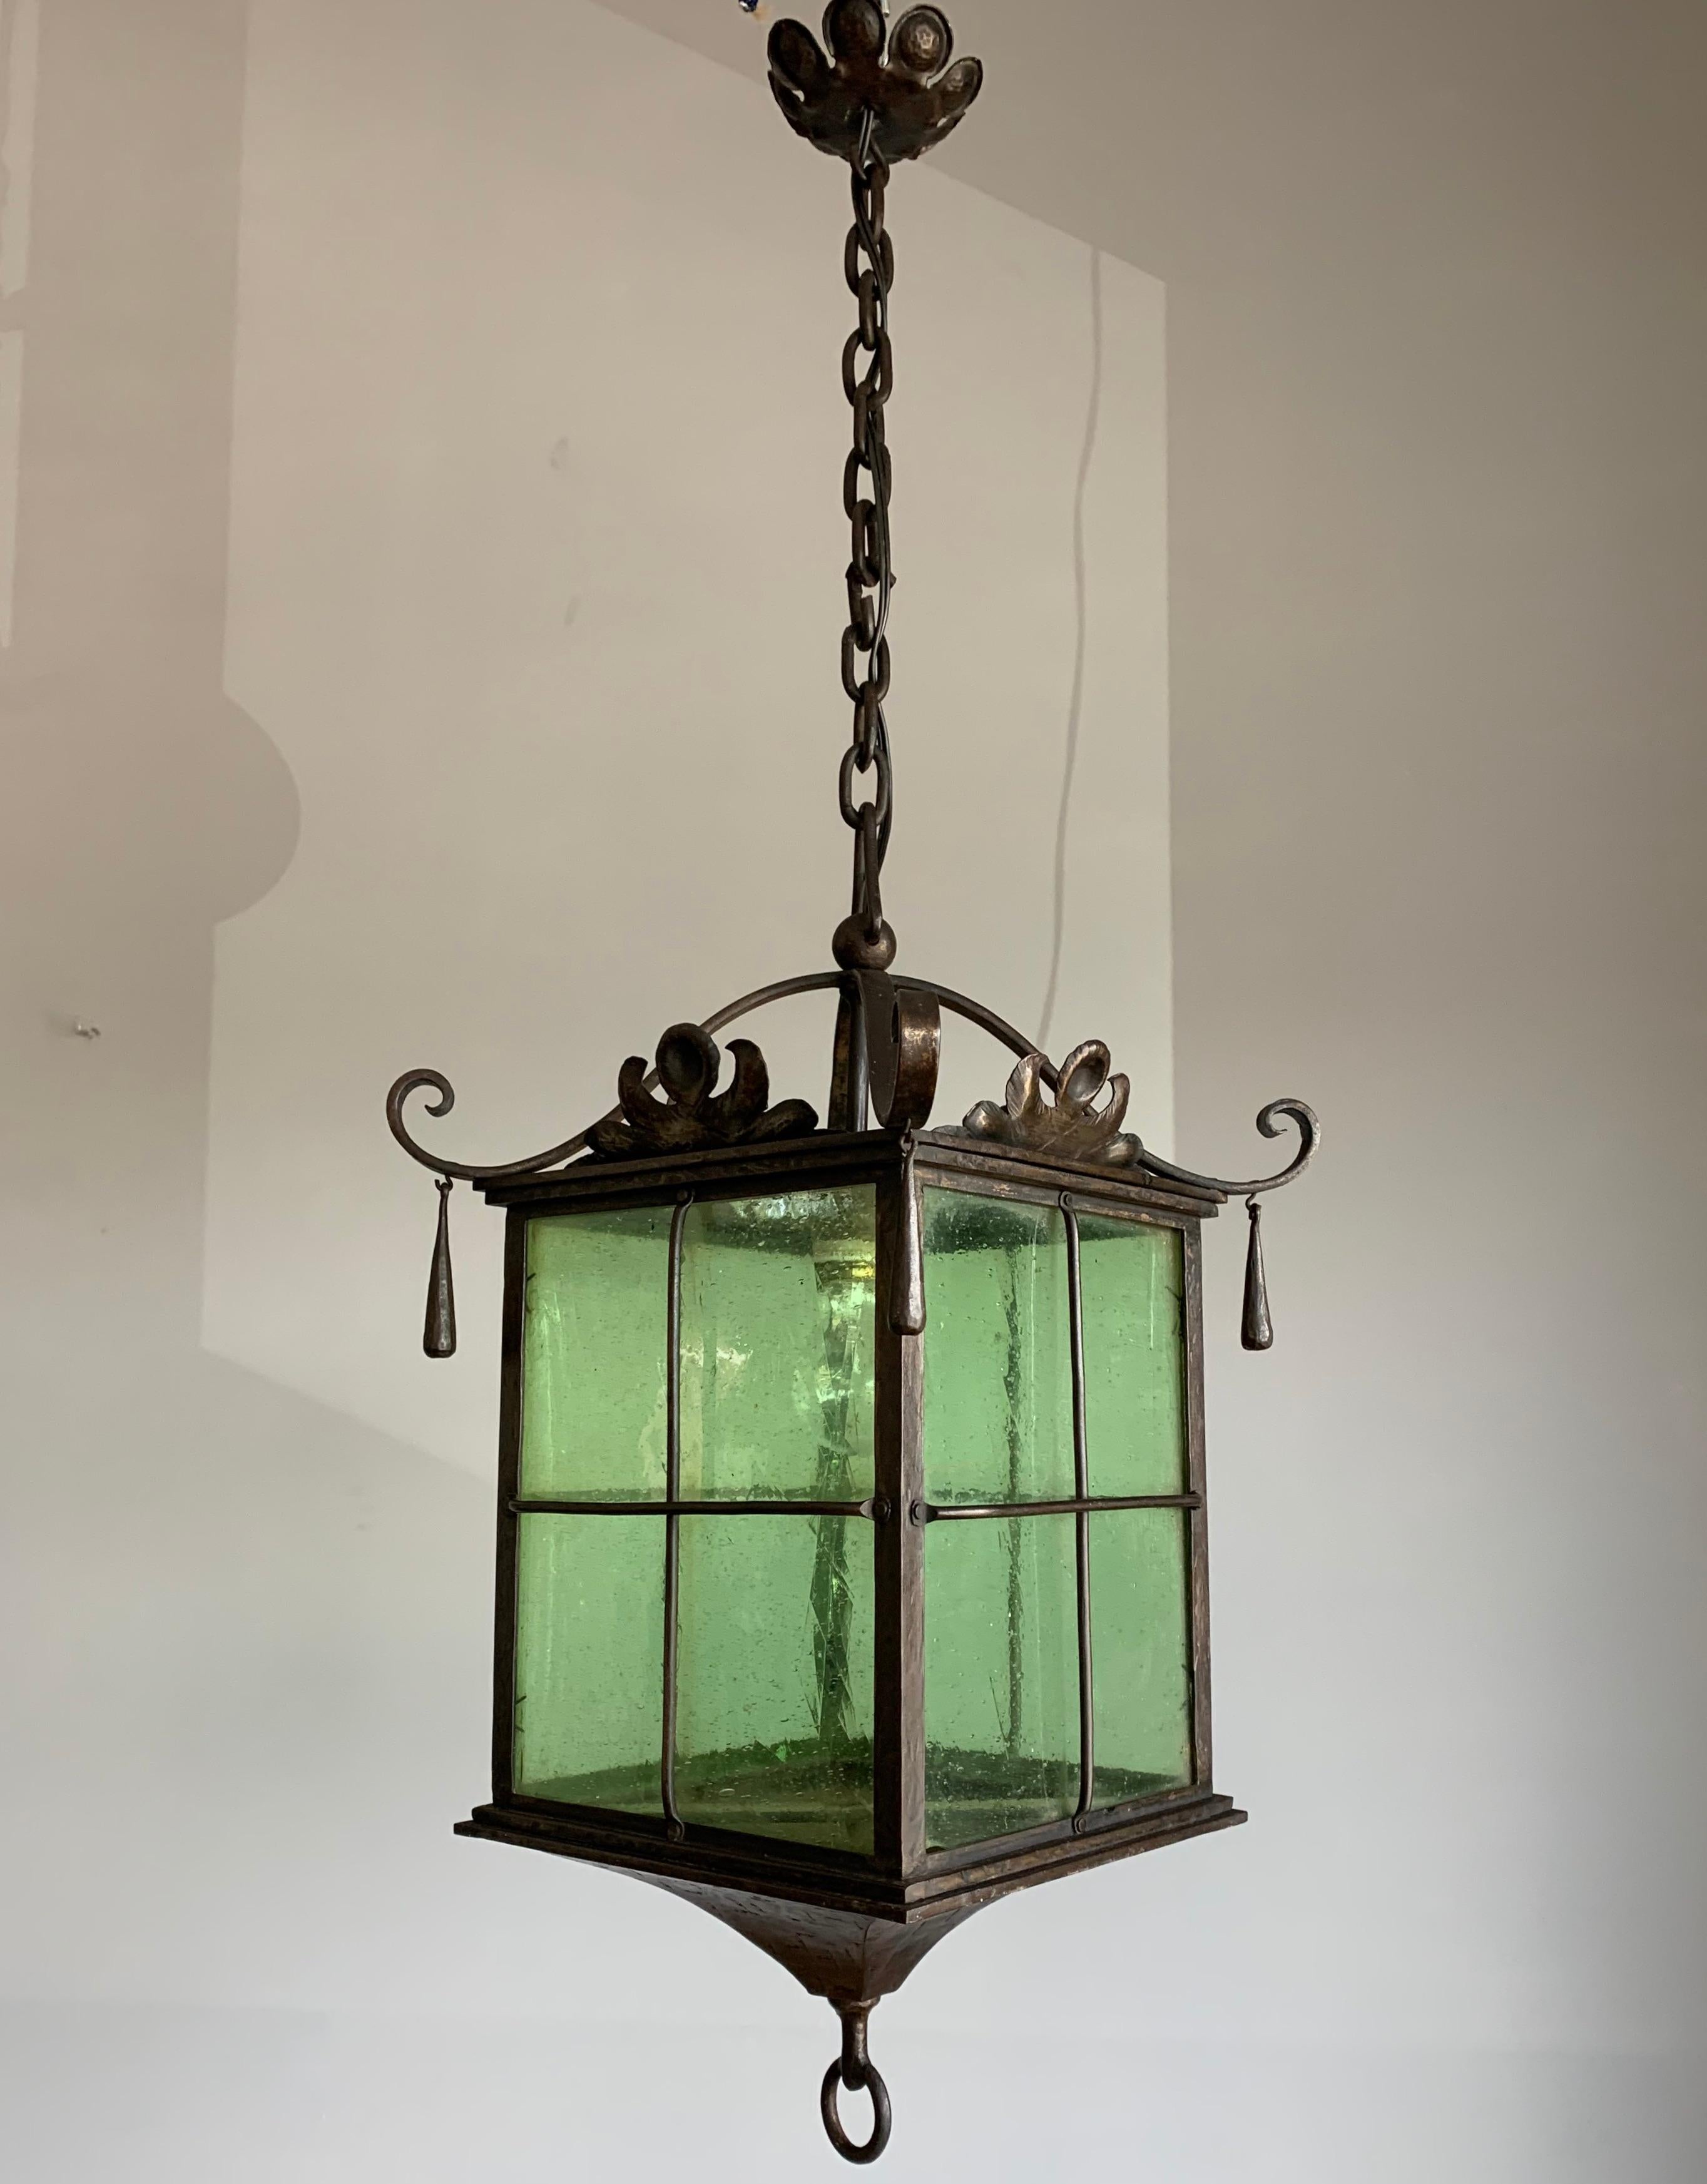 European Beautiful Large Arts & Crafts Wrought Iron and Cathedral Glass Lantern / Pendant